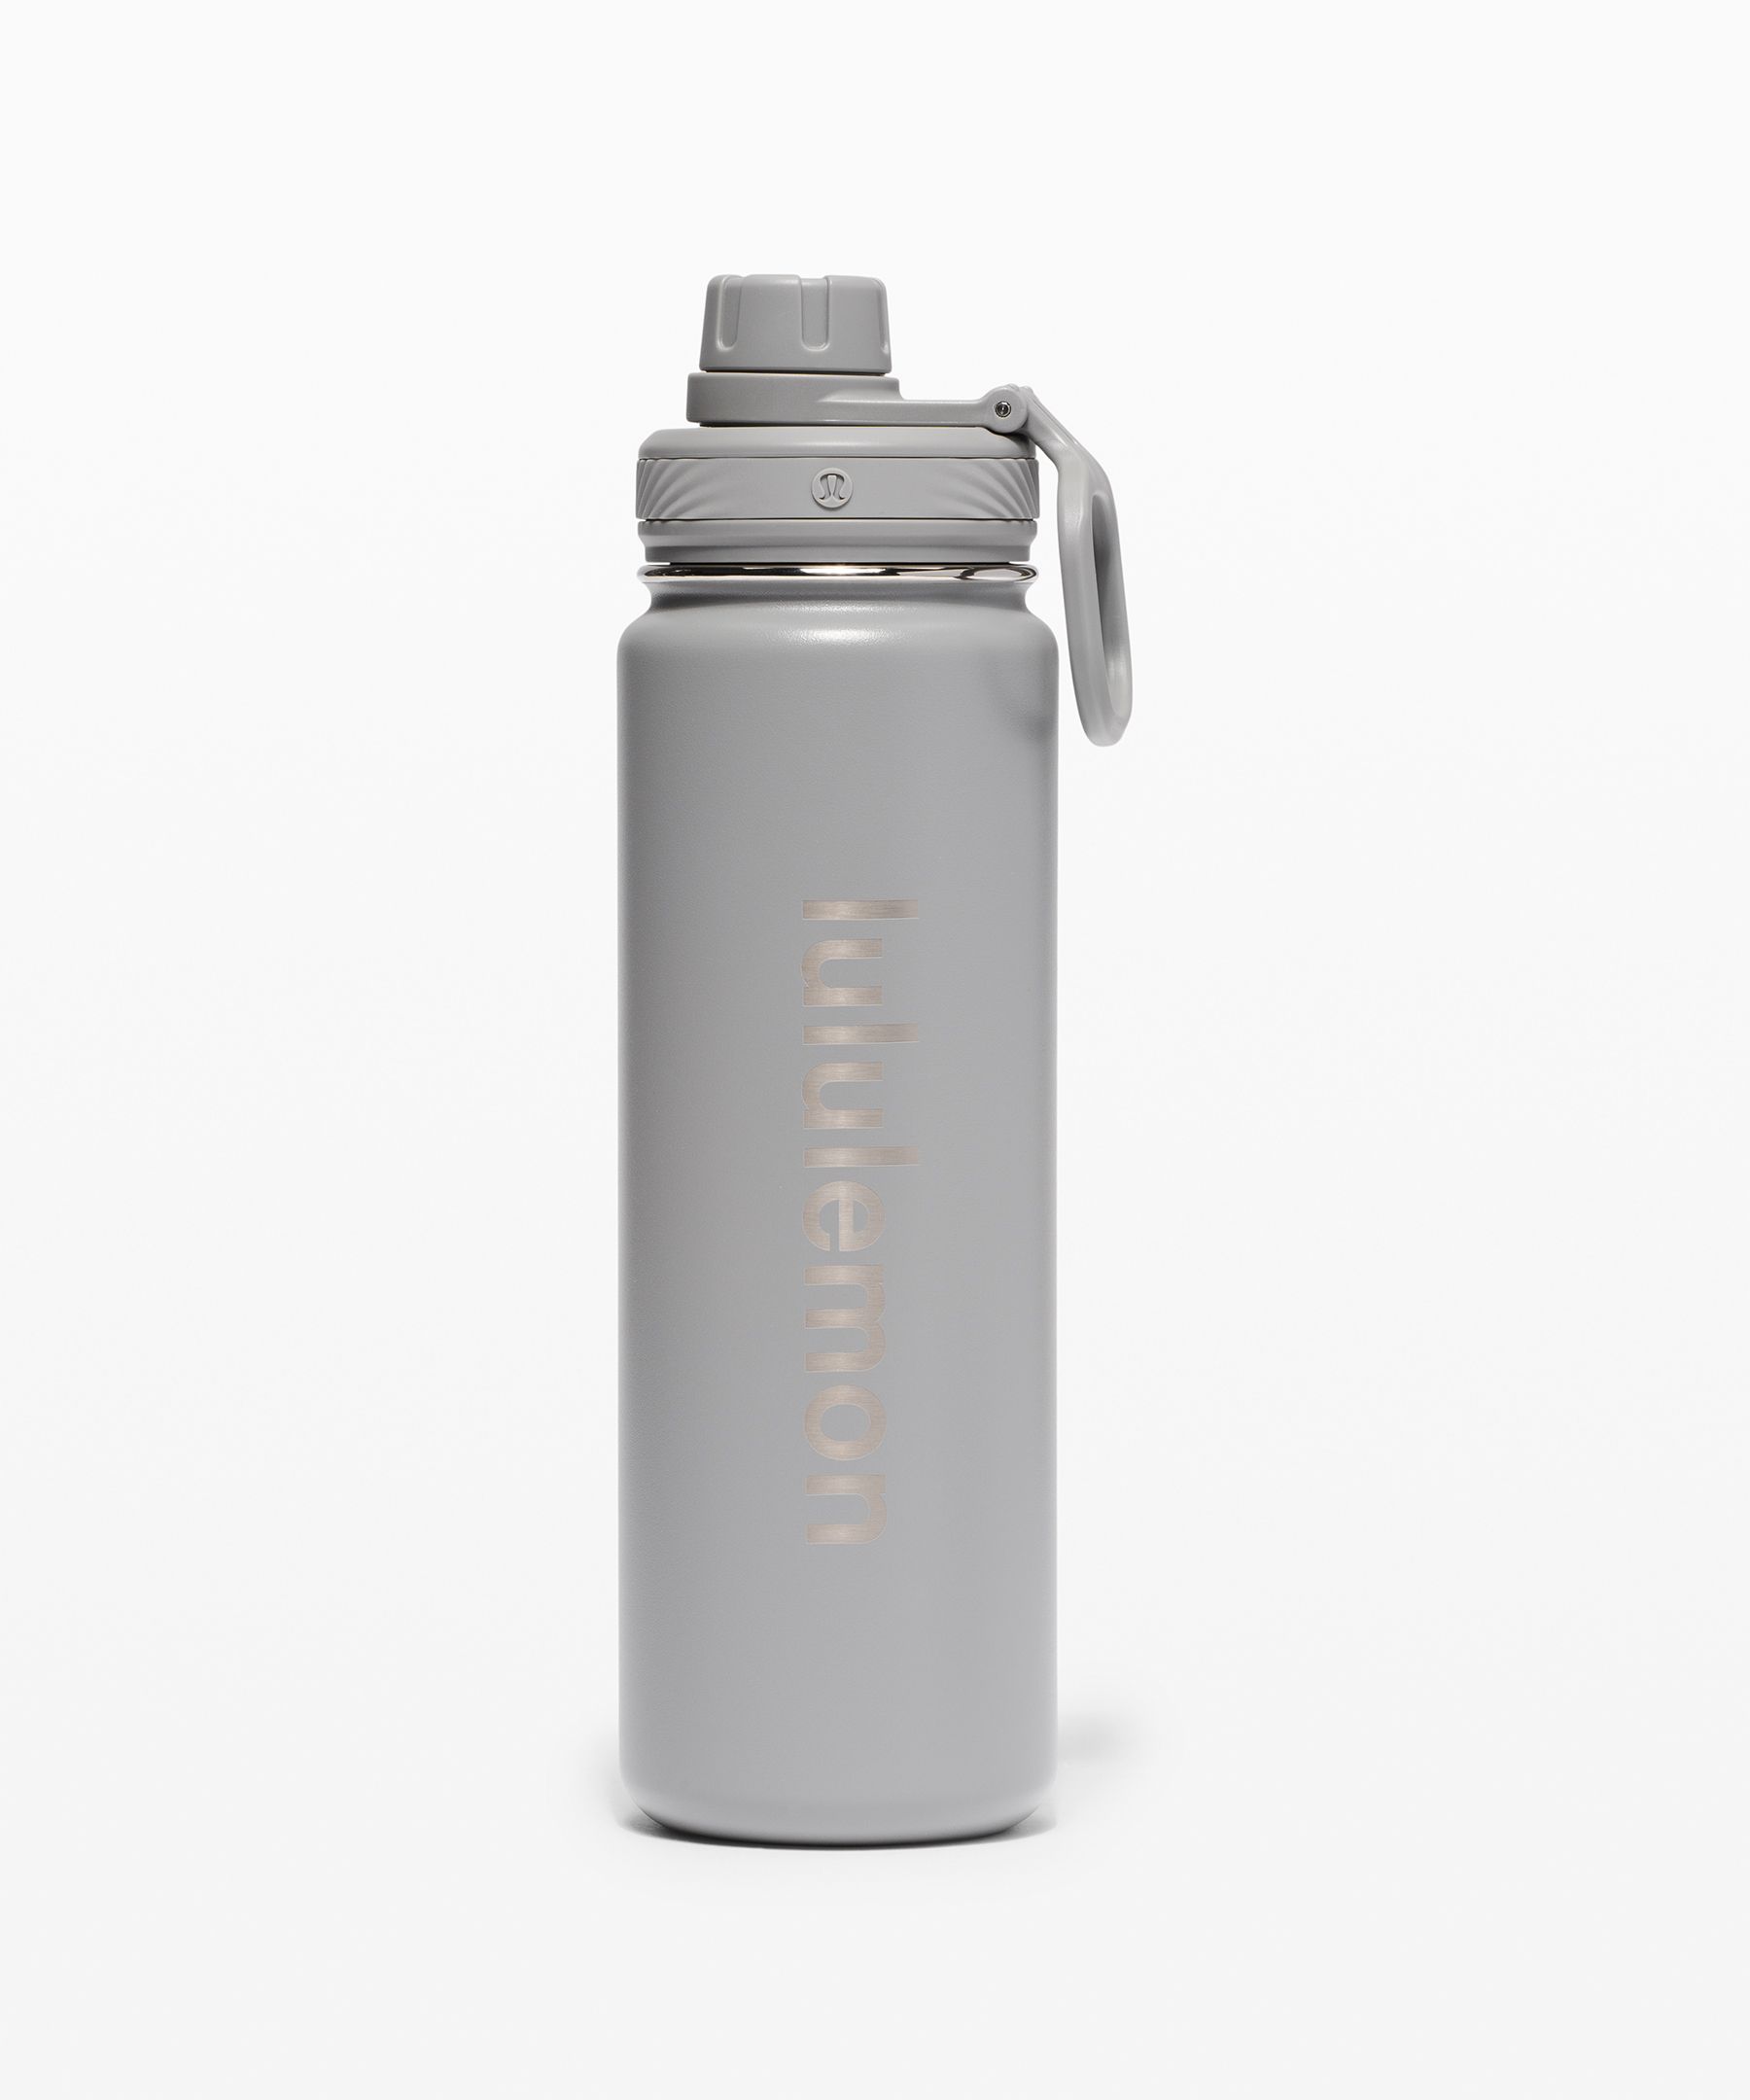 Lululemon Small 20 oz Water Container Bike Fitness Pull Spout Bottle  Aluminum